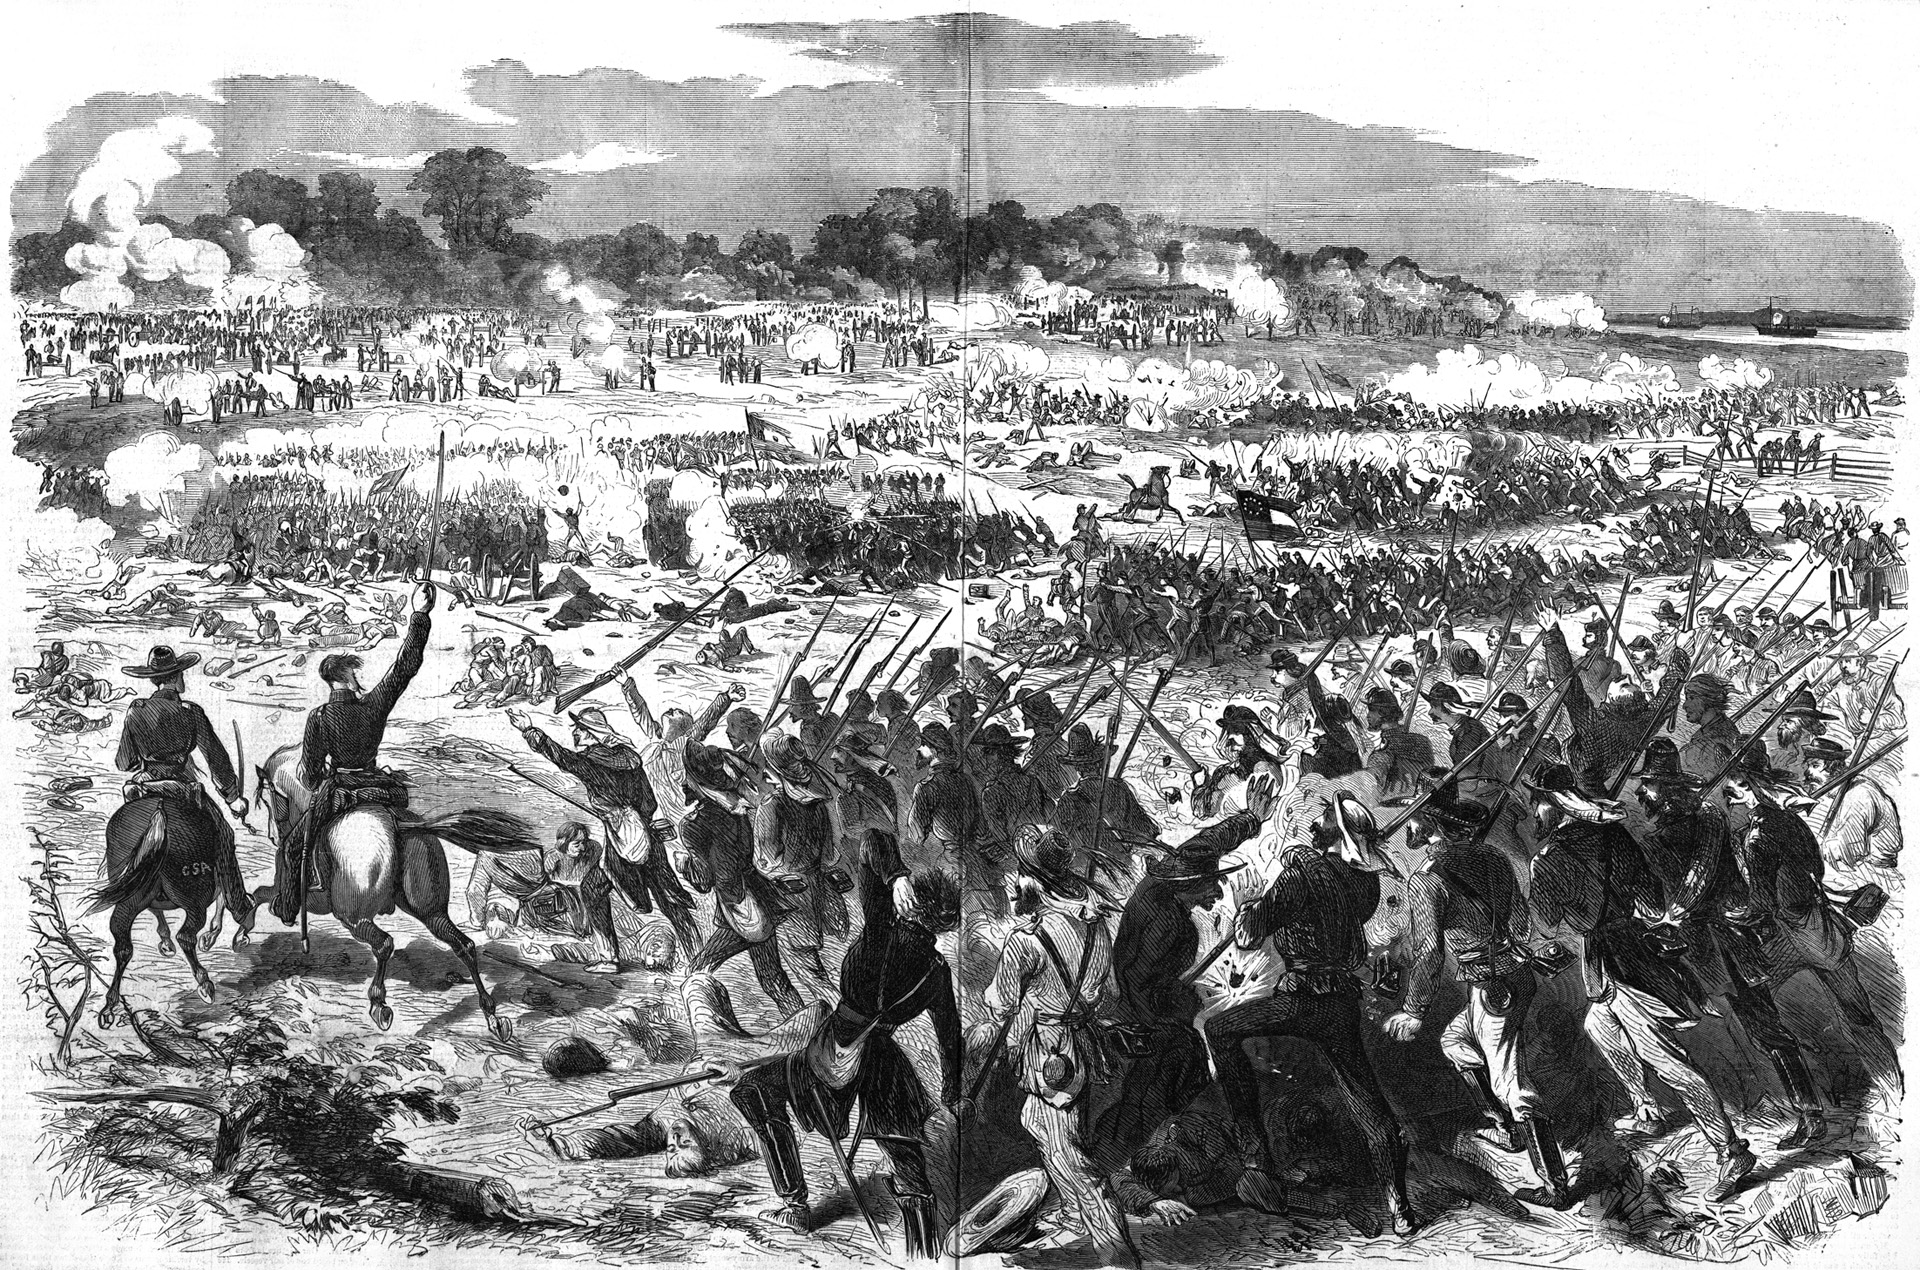 Confederate troops assaulting Malvern Hill quickly became pinned down. Their commanders knew it was suicide to proceed, but they had orders to continue the attack.